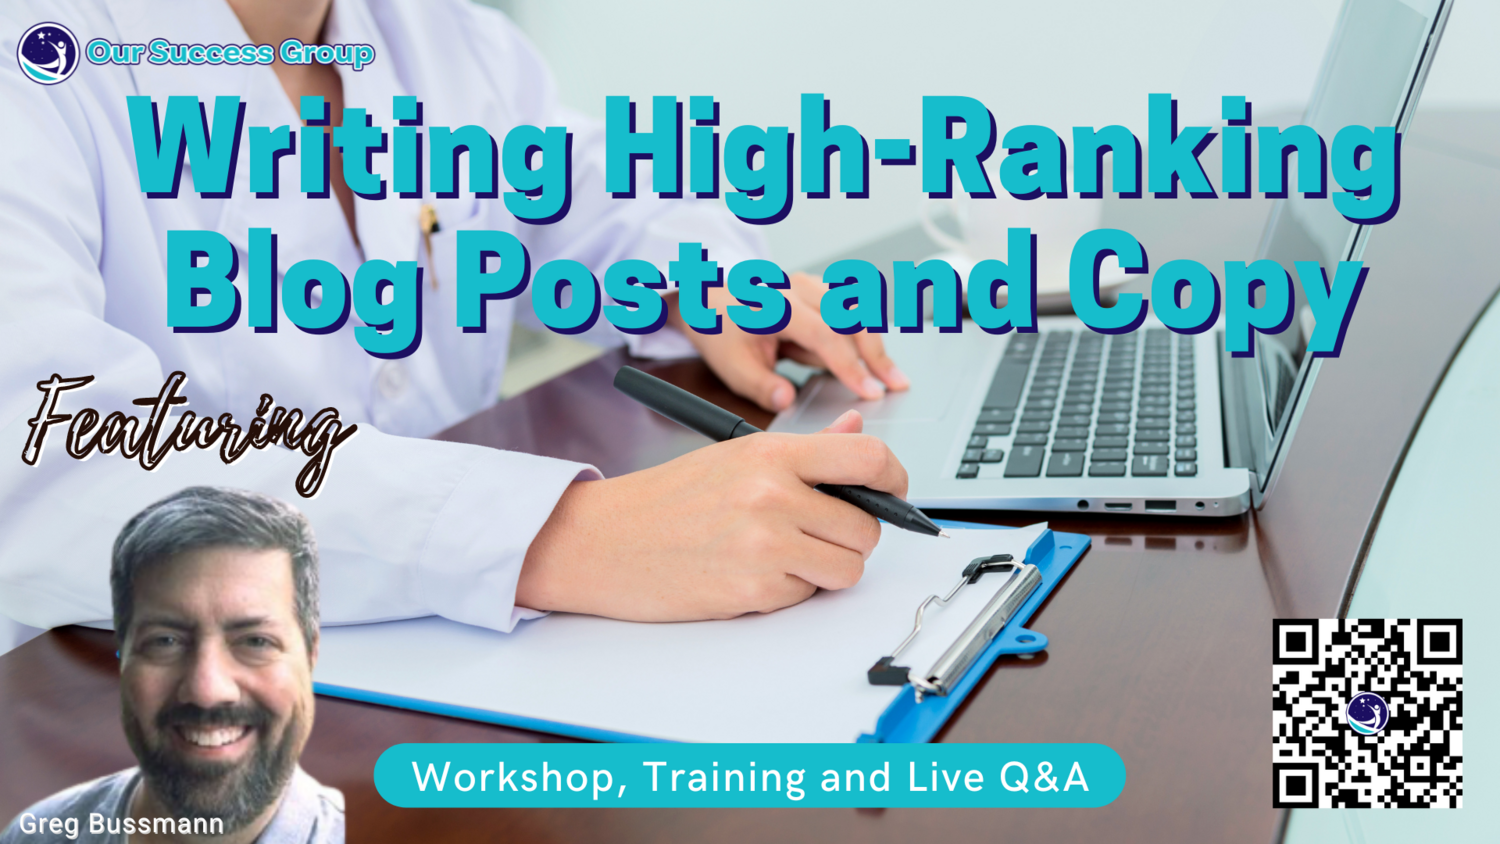 Writing High-Ranking Blog Posts and Copy